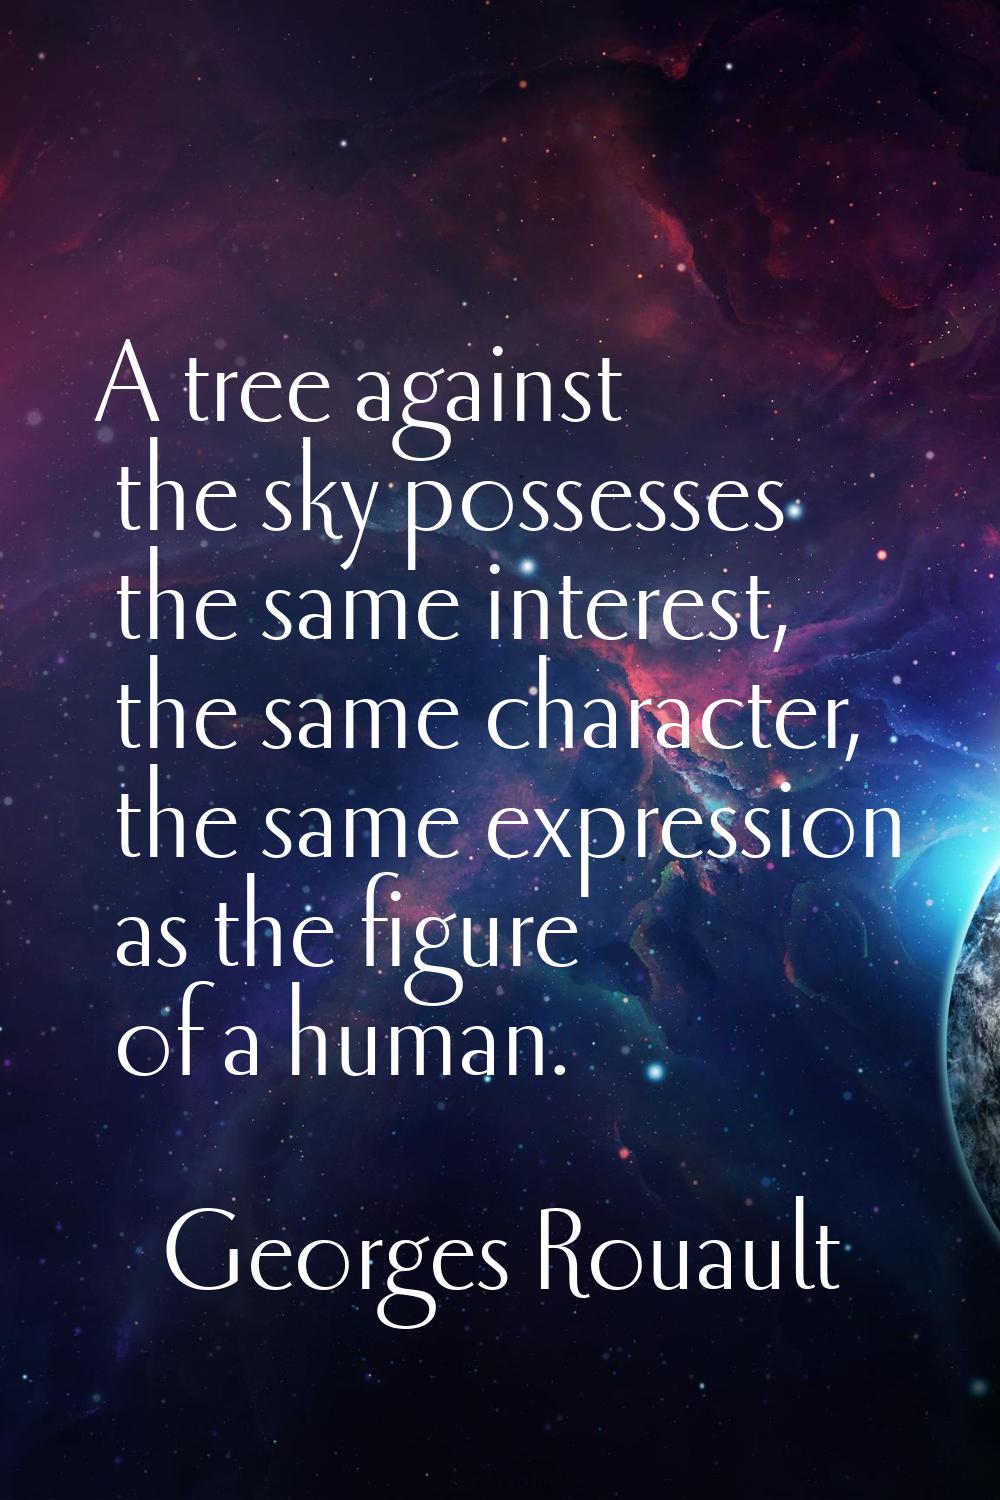 A tree against the sky possesses the same interest, the same character, the same expression as the 